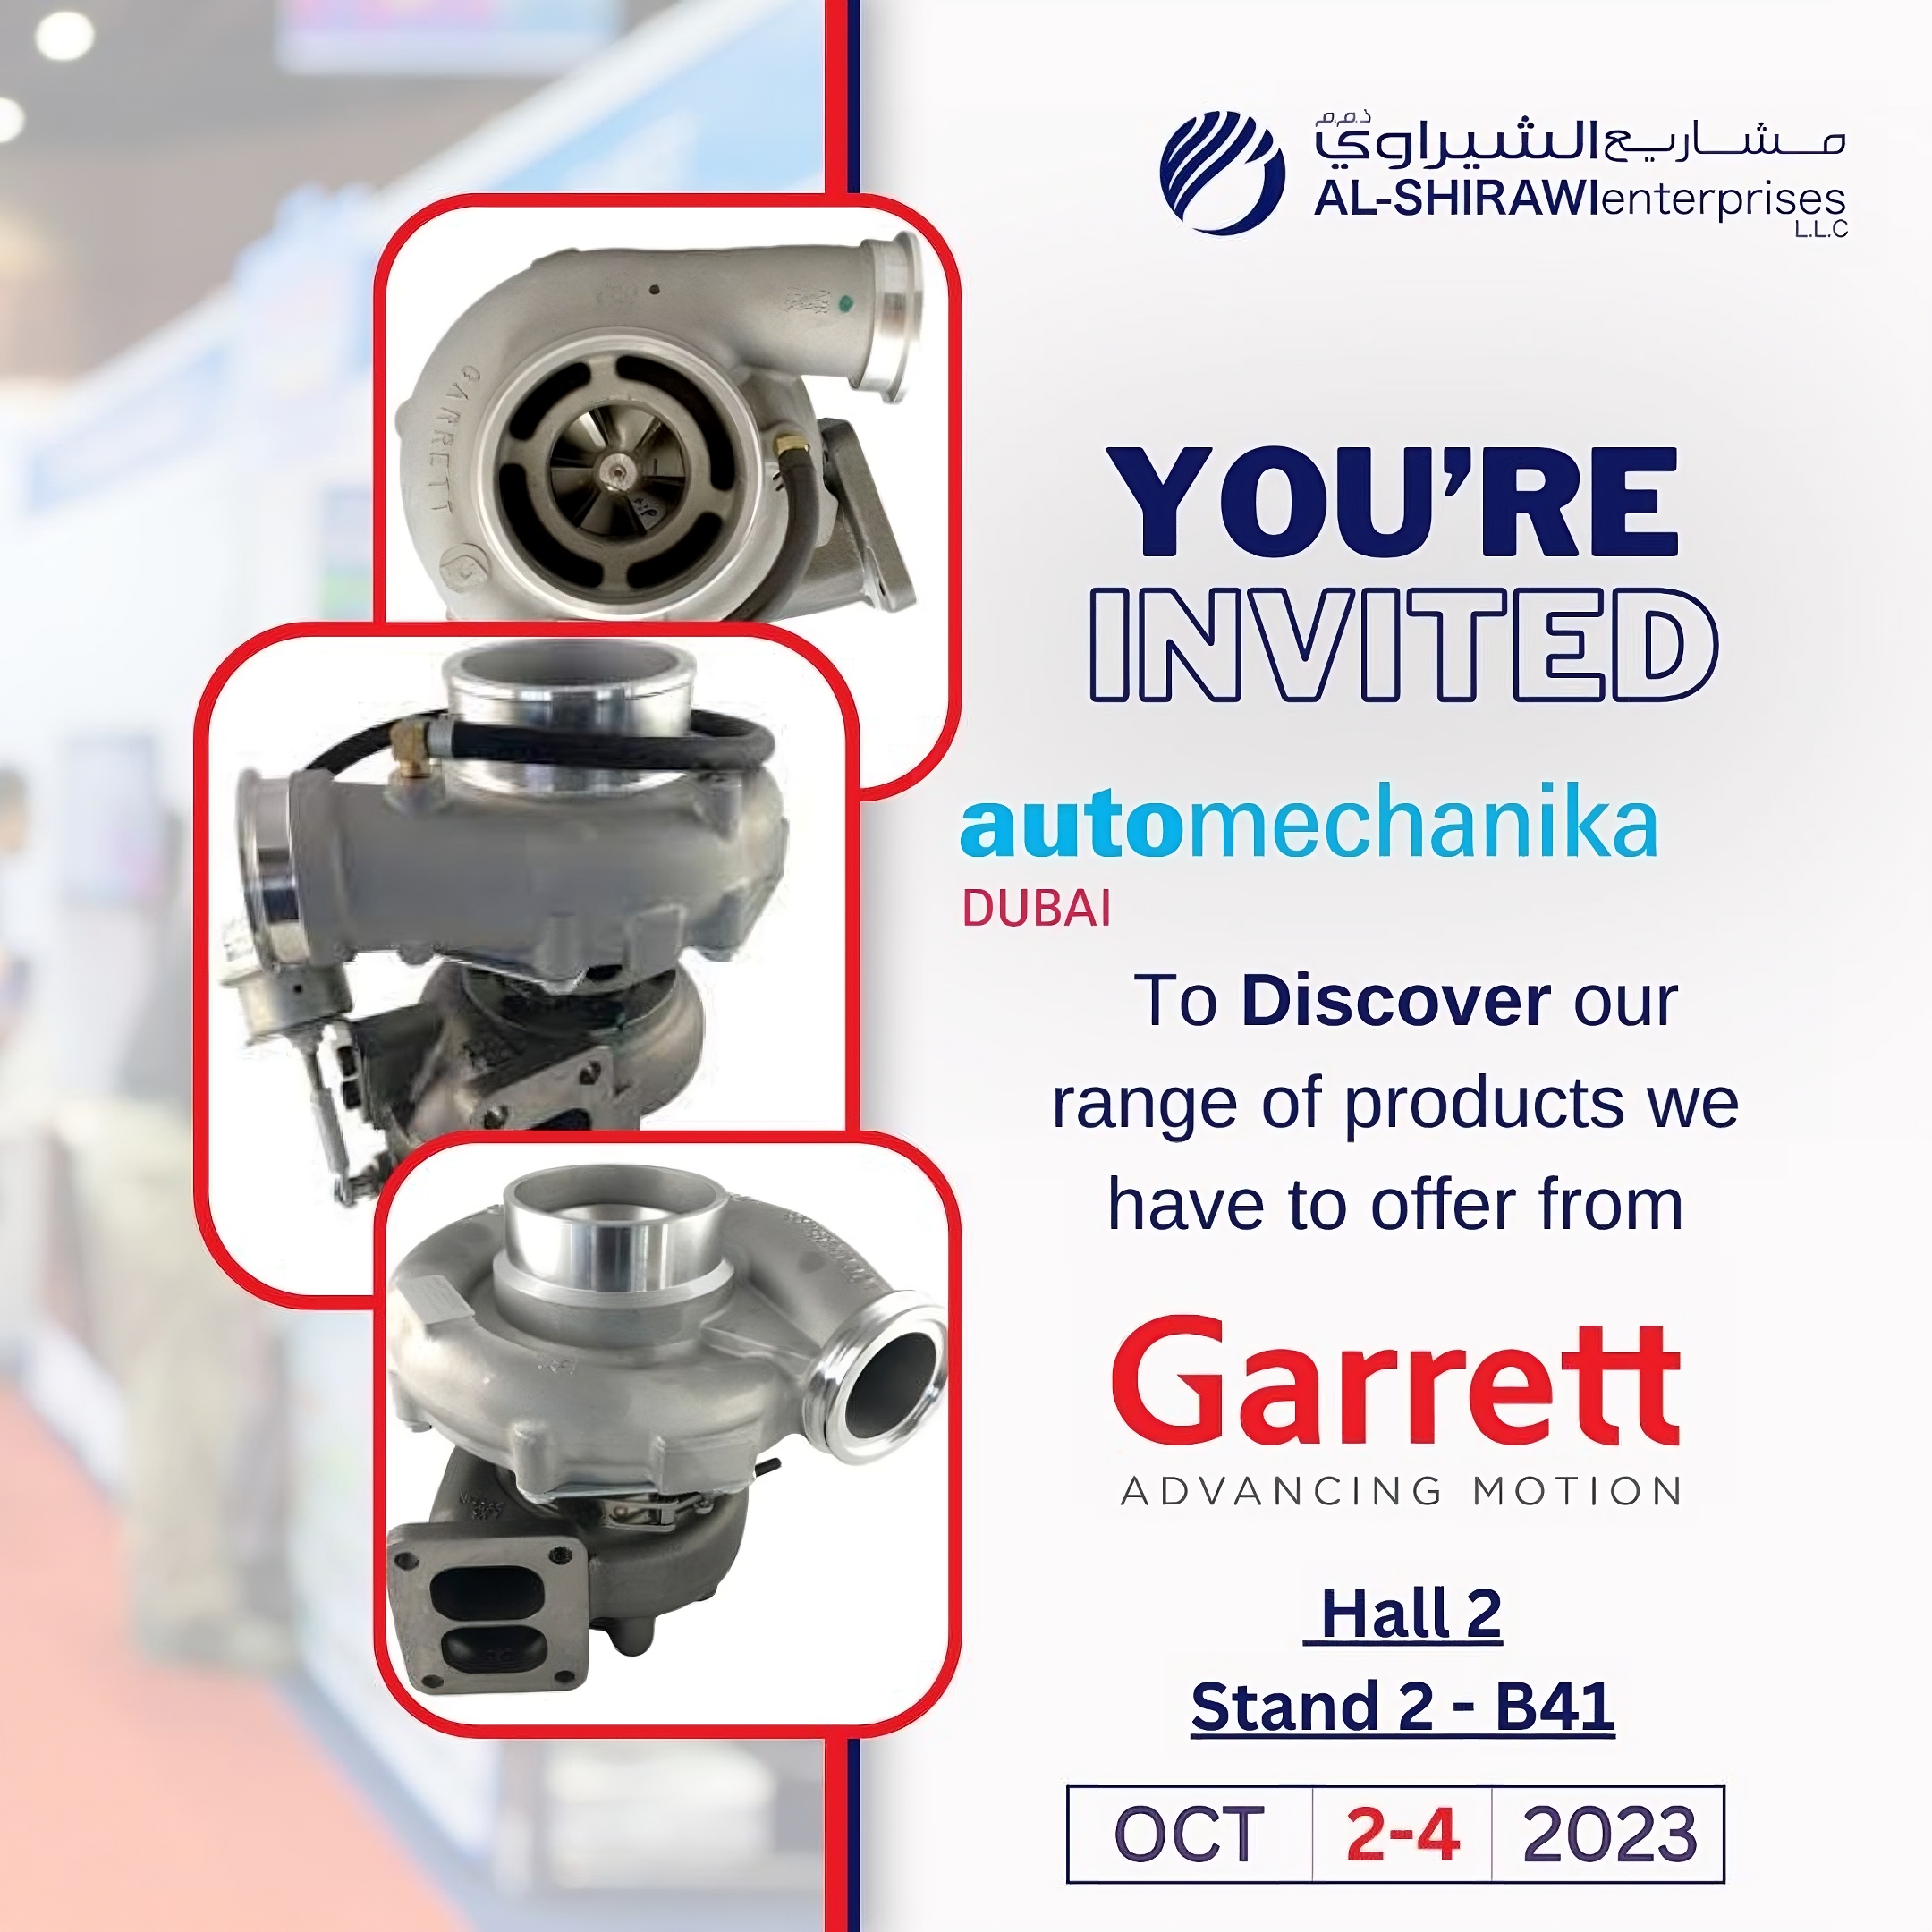 📢 Exciting News! We’re thrilled to announce our participation in Automechanika Dubai this year!